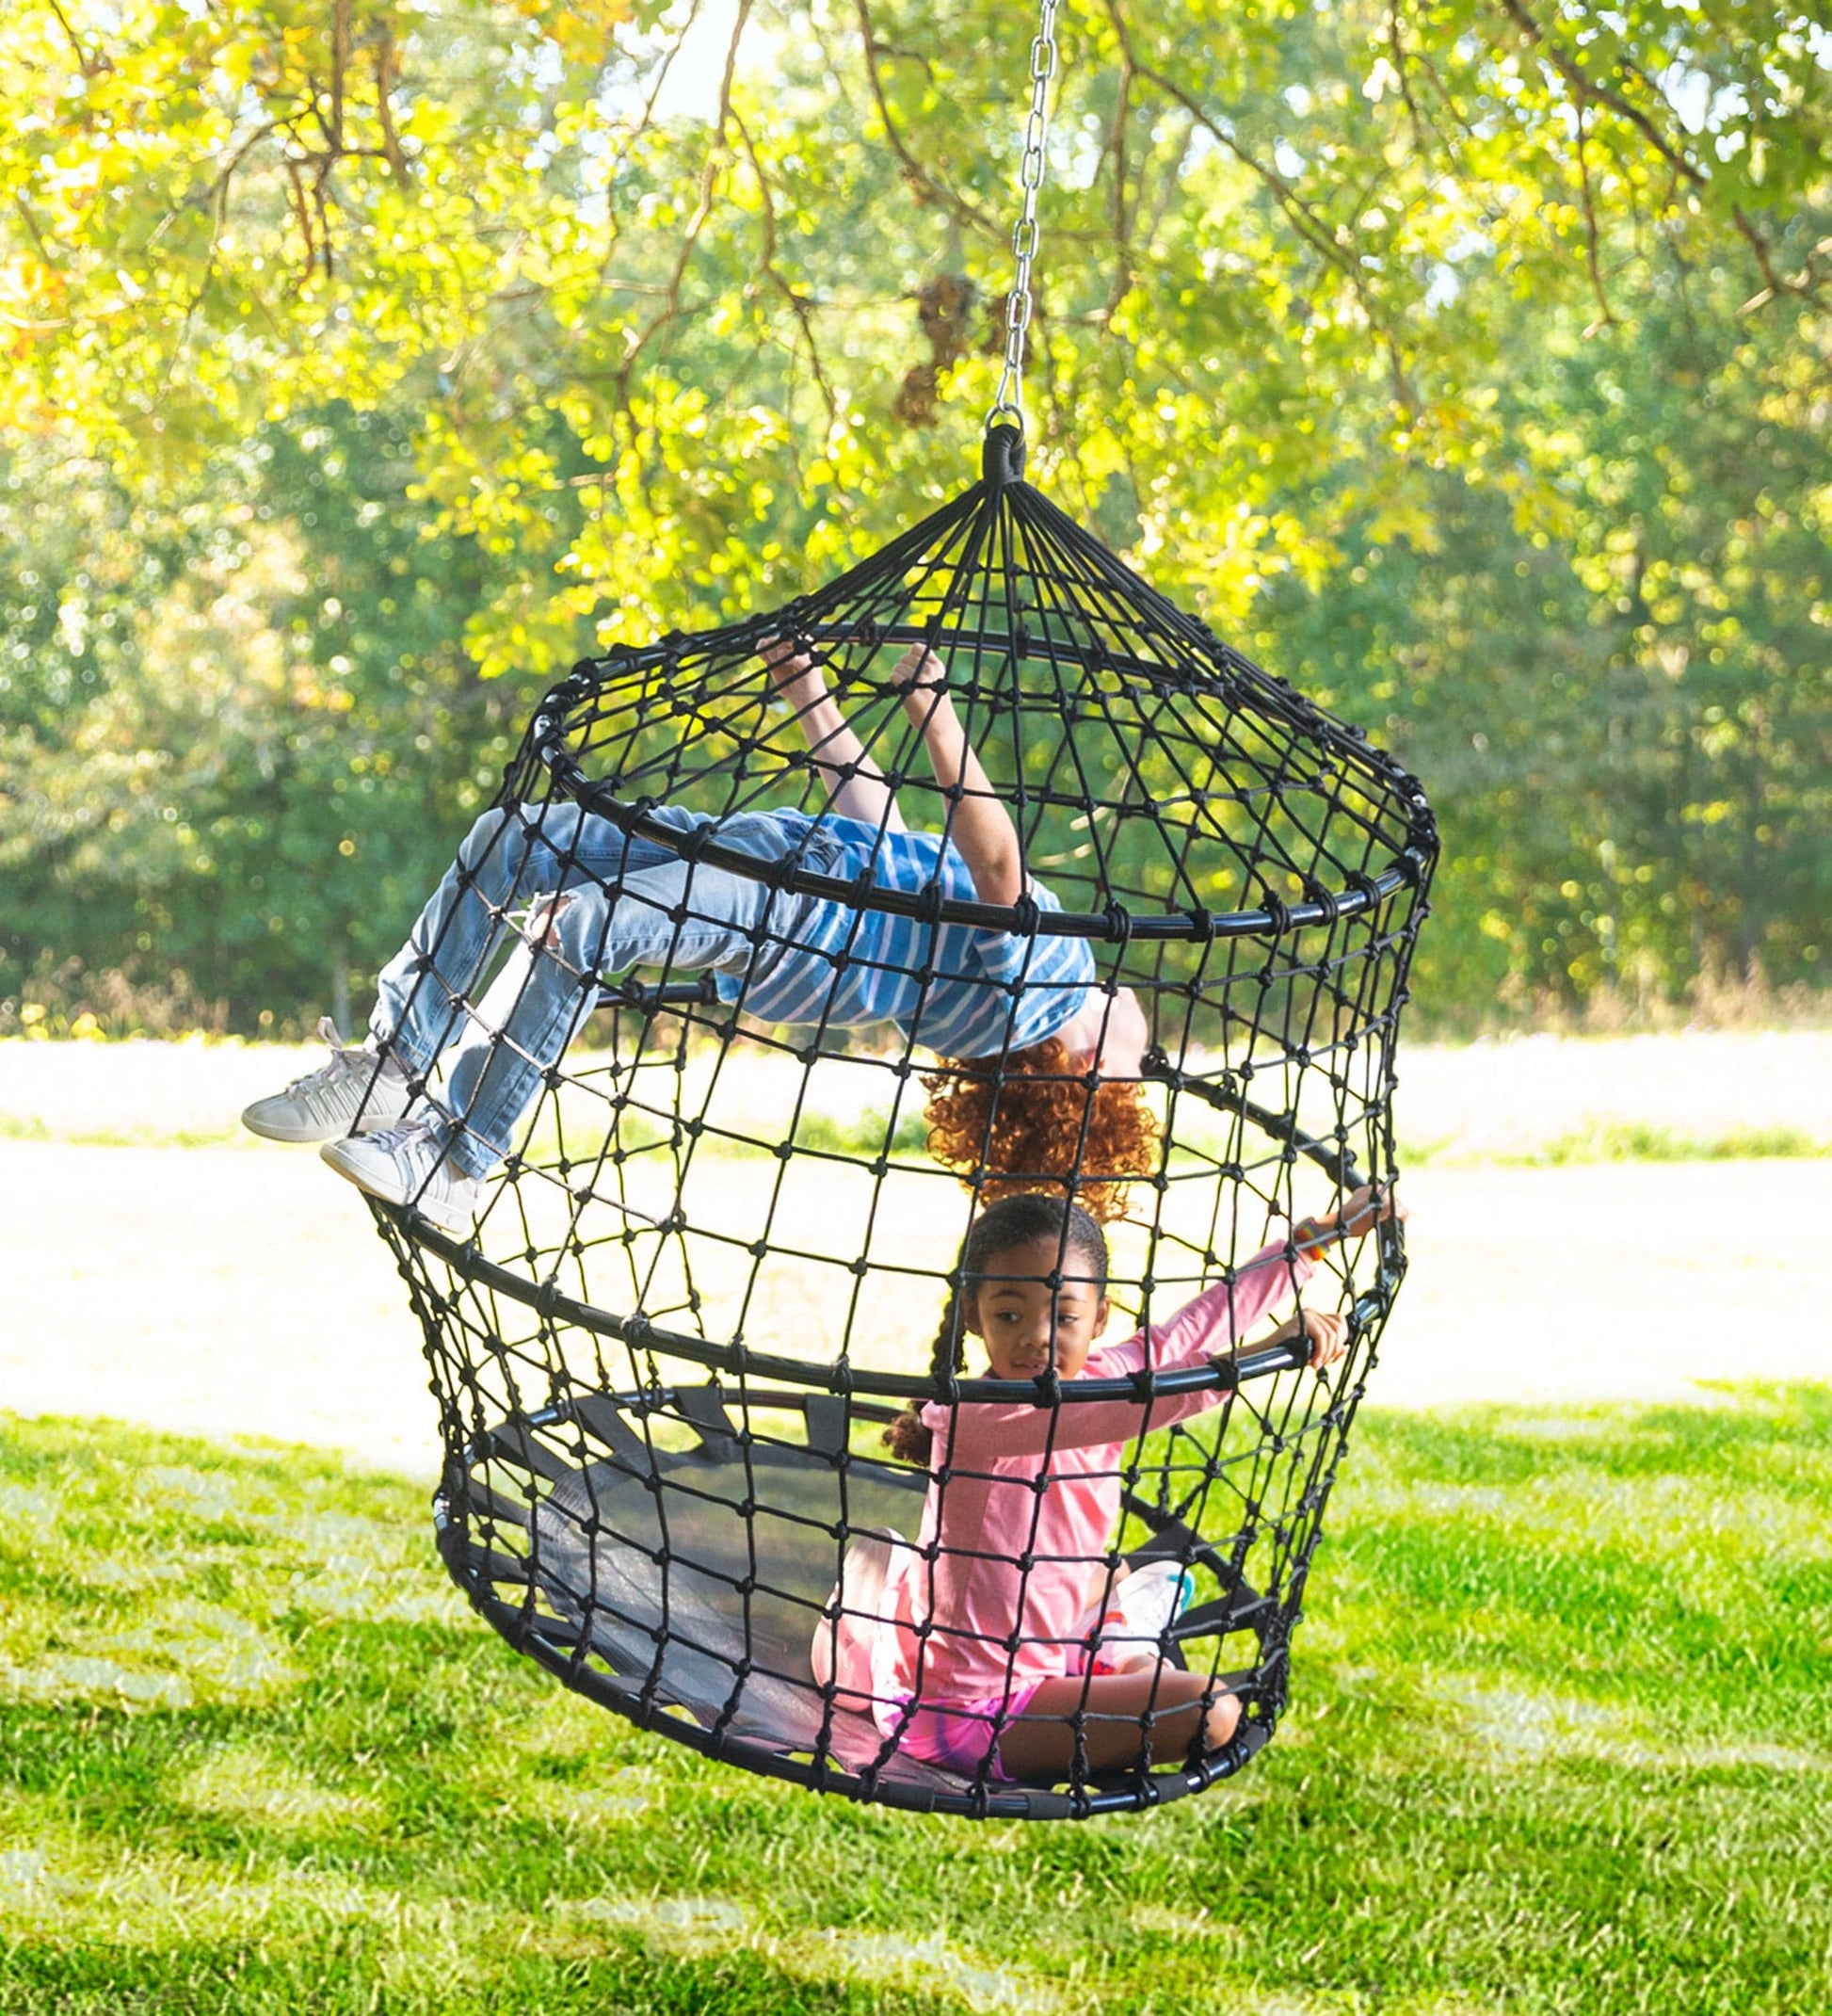 40 Classic Outdoor Games for Kids: Backyard Games, Playground Games, and  More